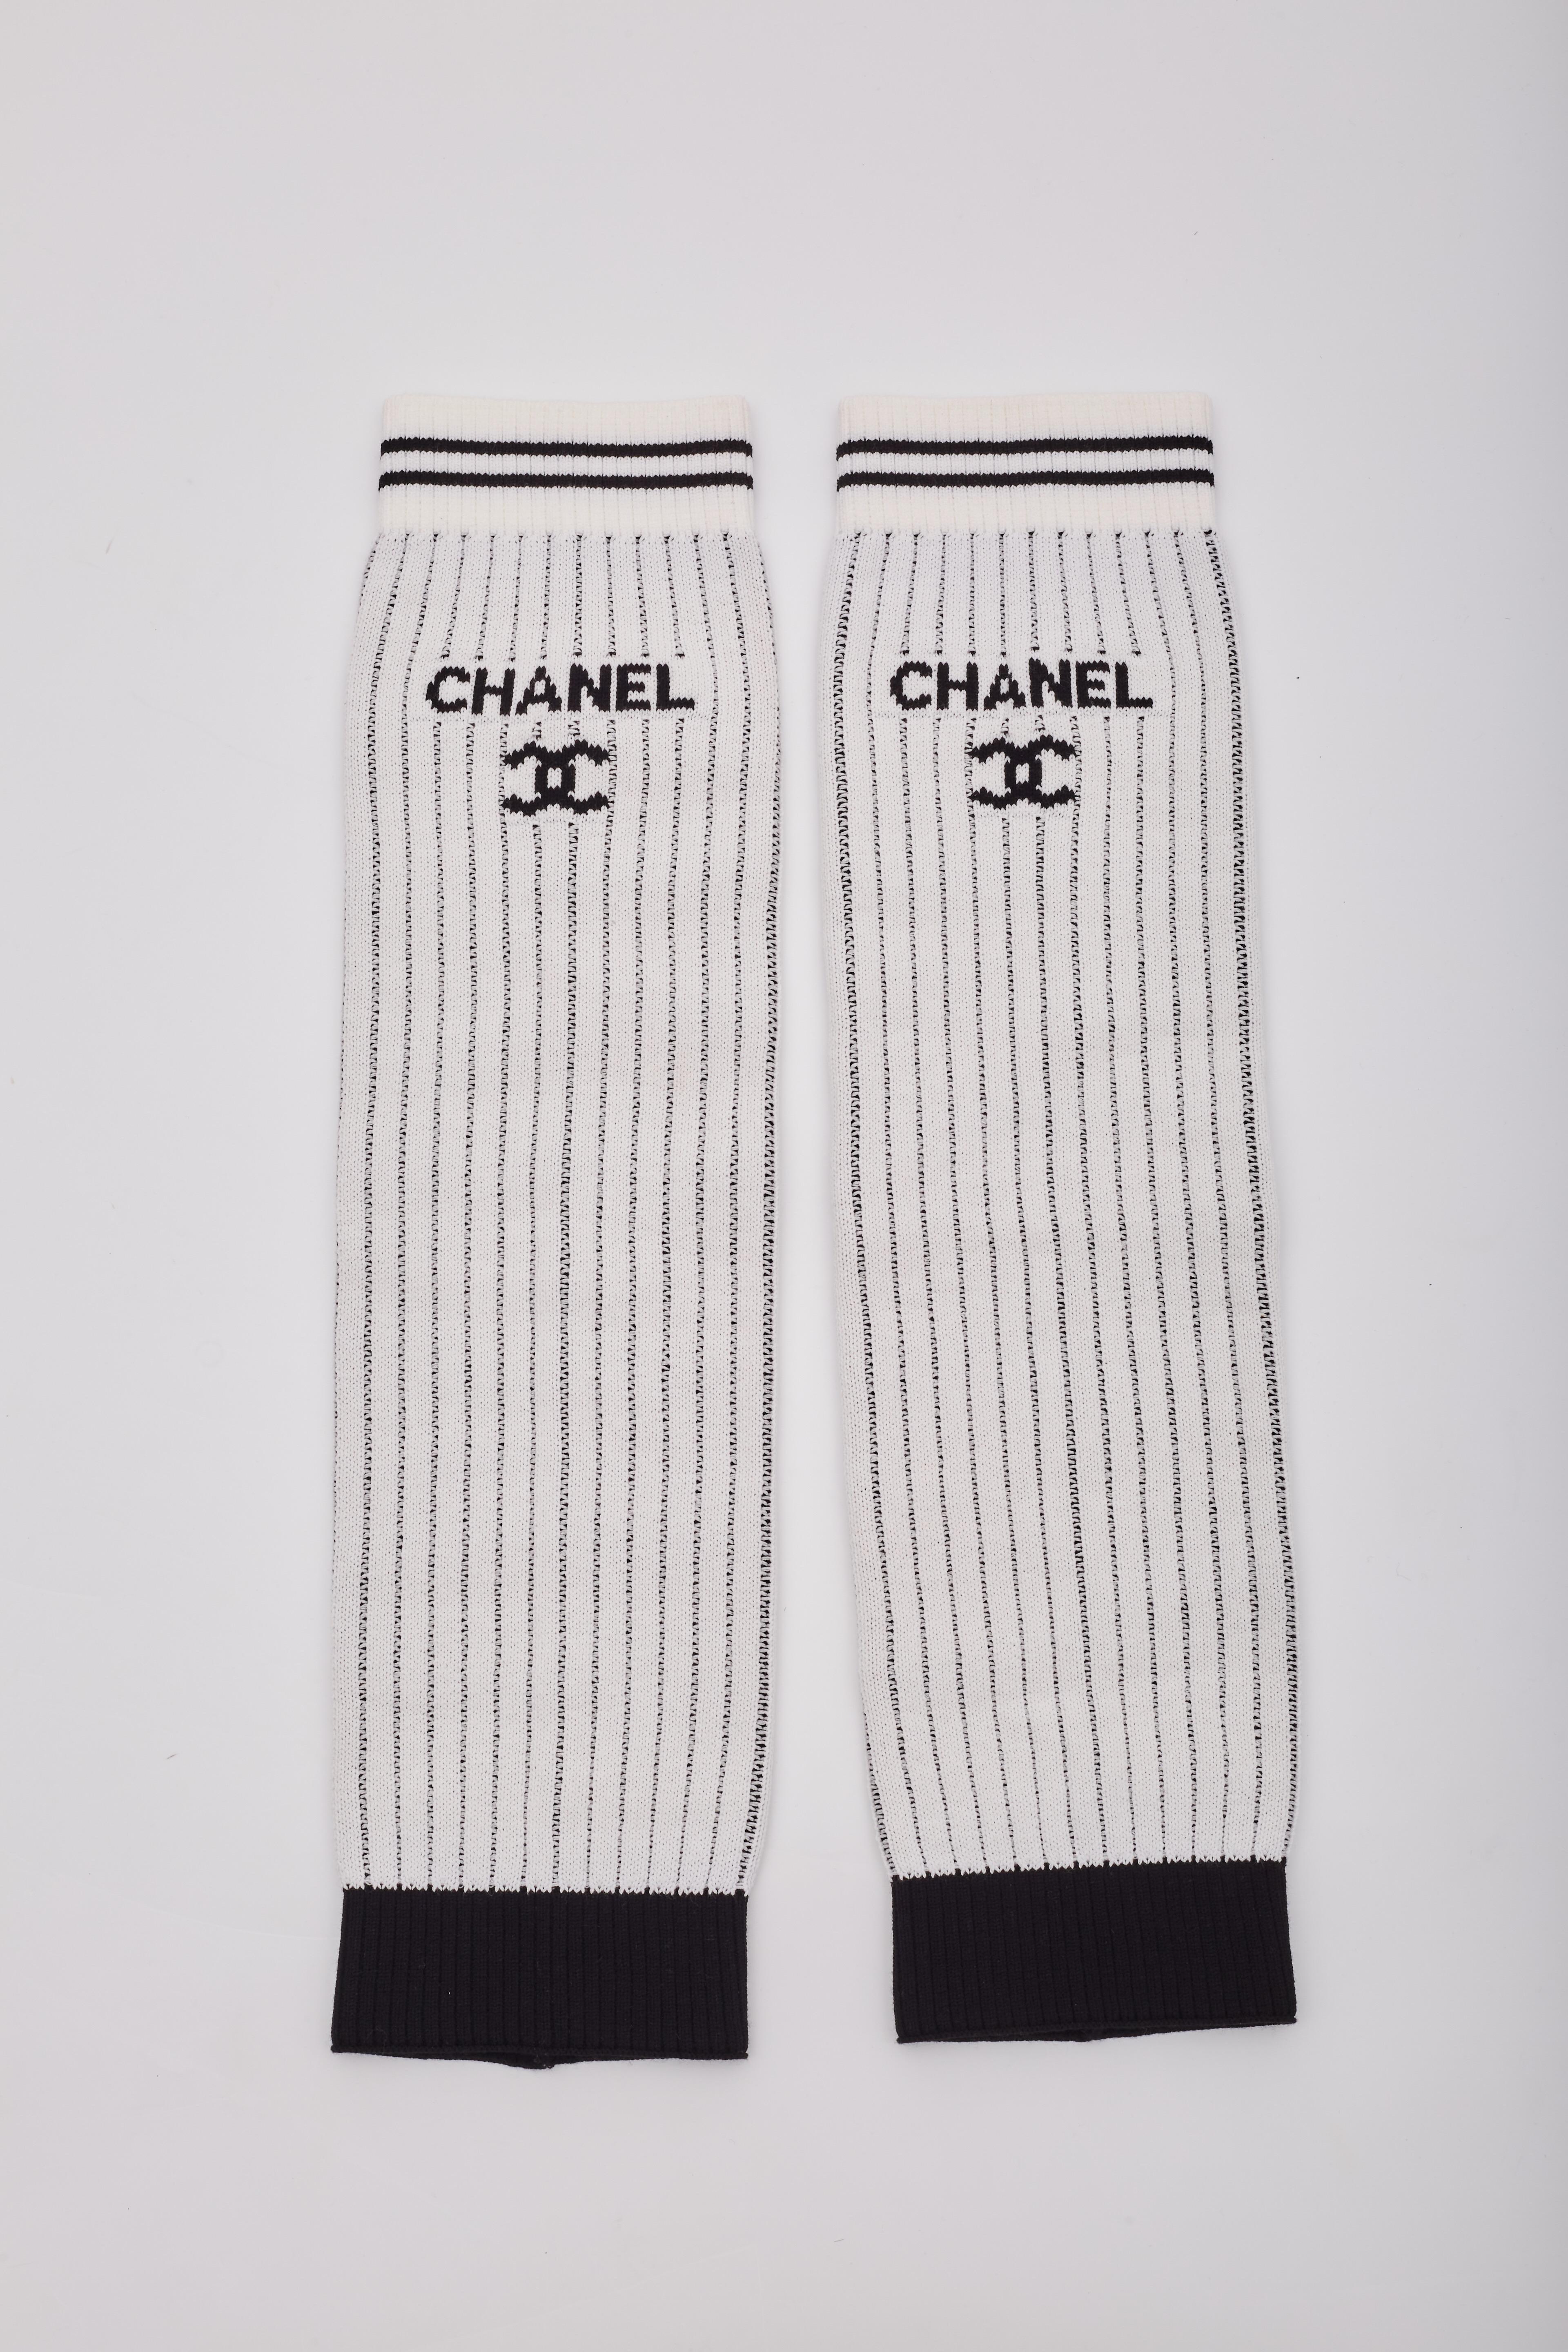 Introducing the sought-after knit Chanel Leg Warmers in white, part of the limited-production collection from Chanel's 2024 Cruise line. This piece was featured in the LA Hollywood Cruise runway fashion show, specifically in Look 3.

53 × 24